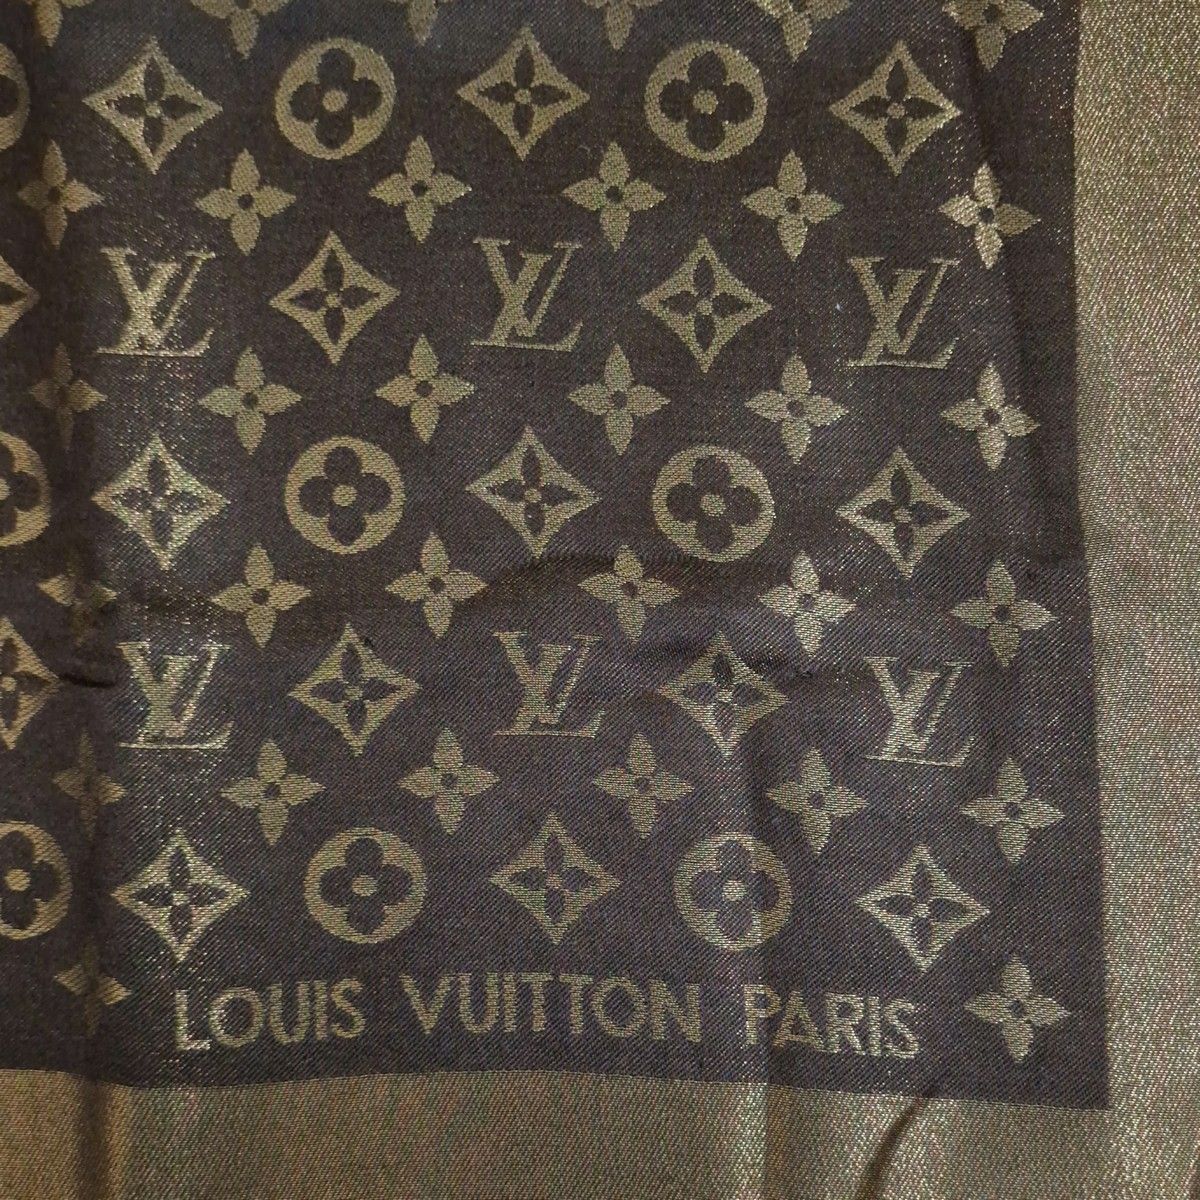 Louis VUITTON - CHALE Monogram in brown wool and silk …